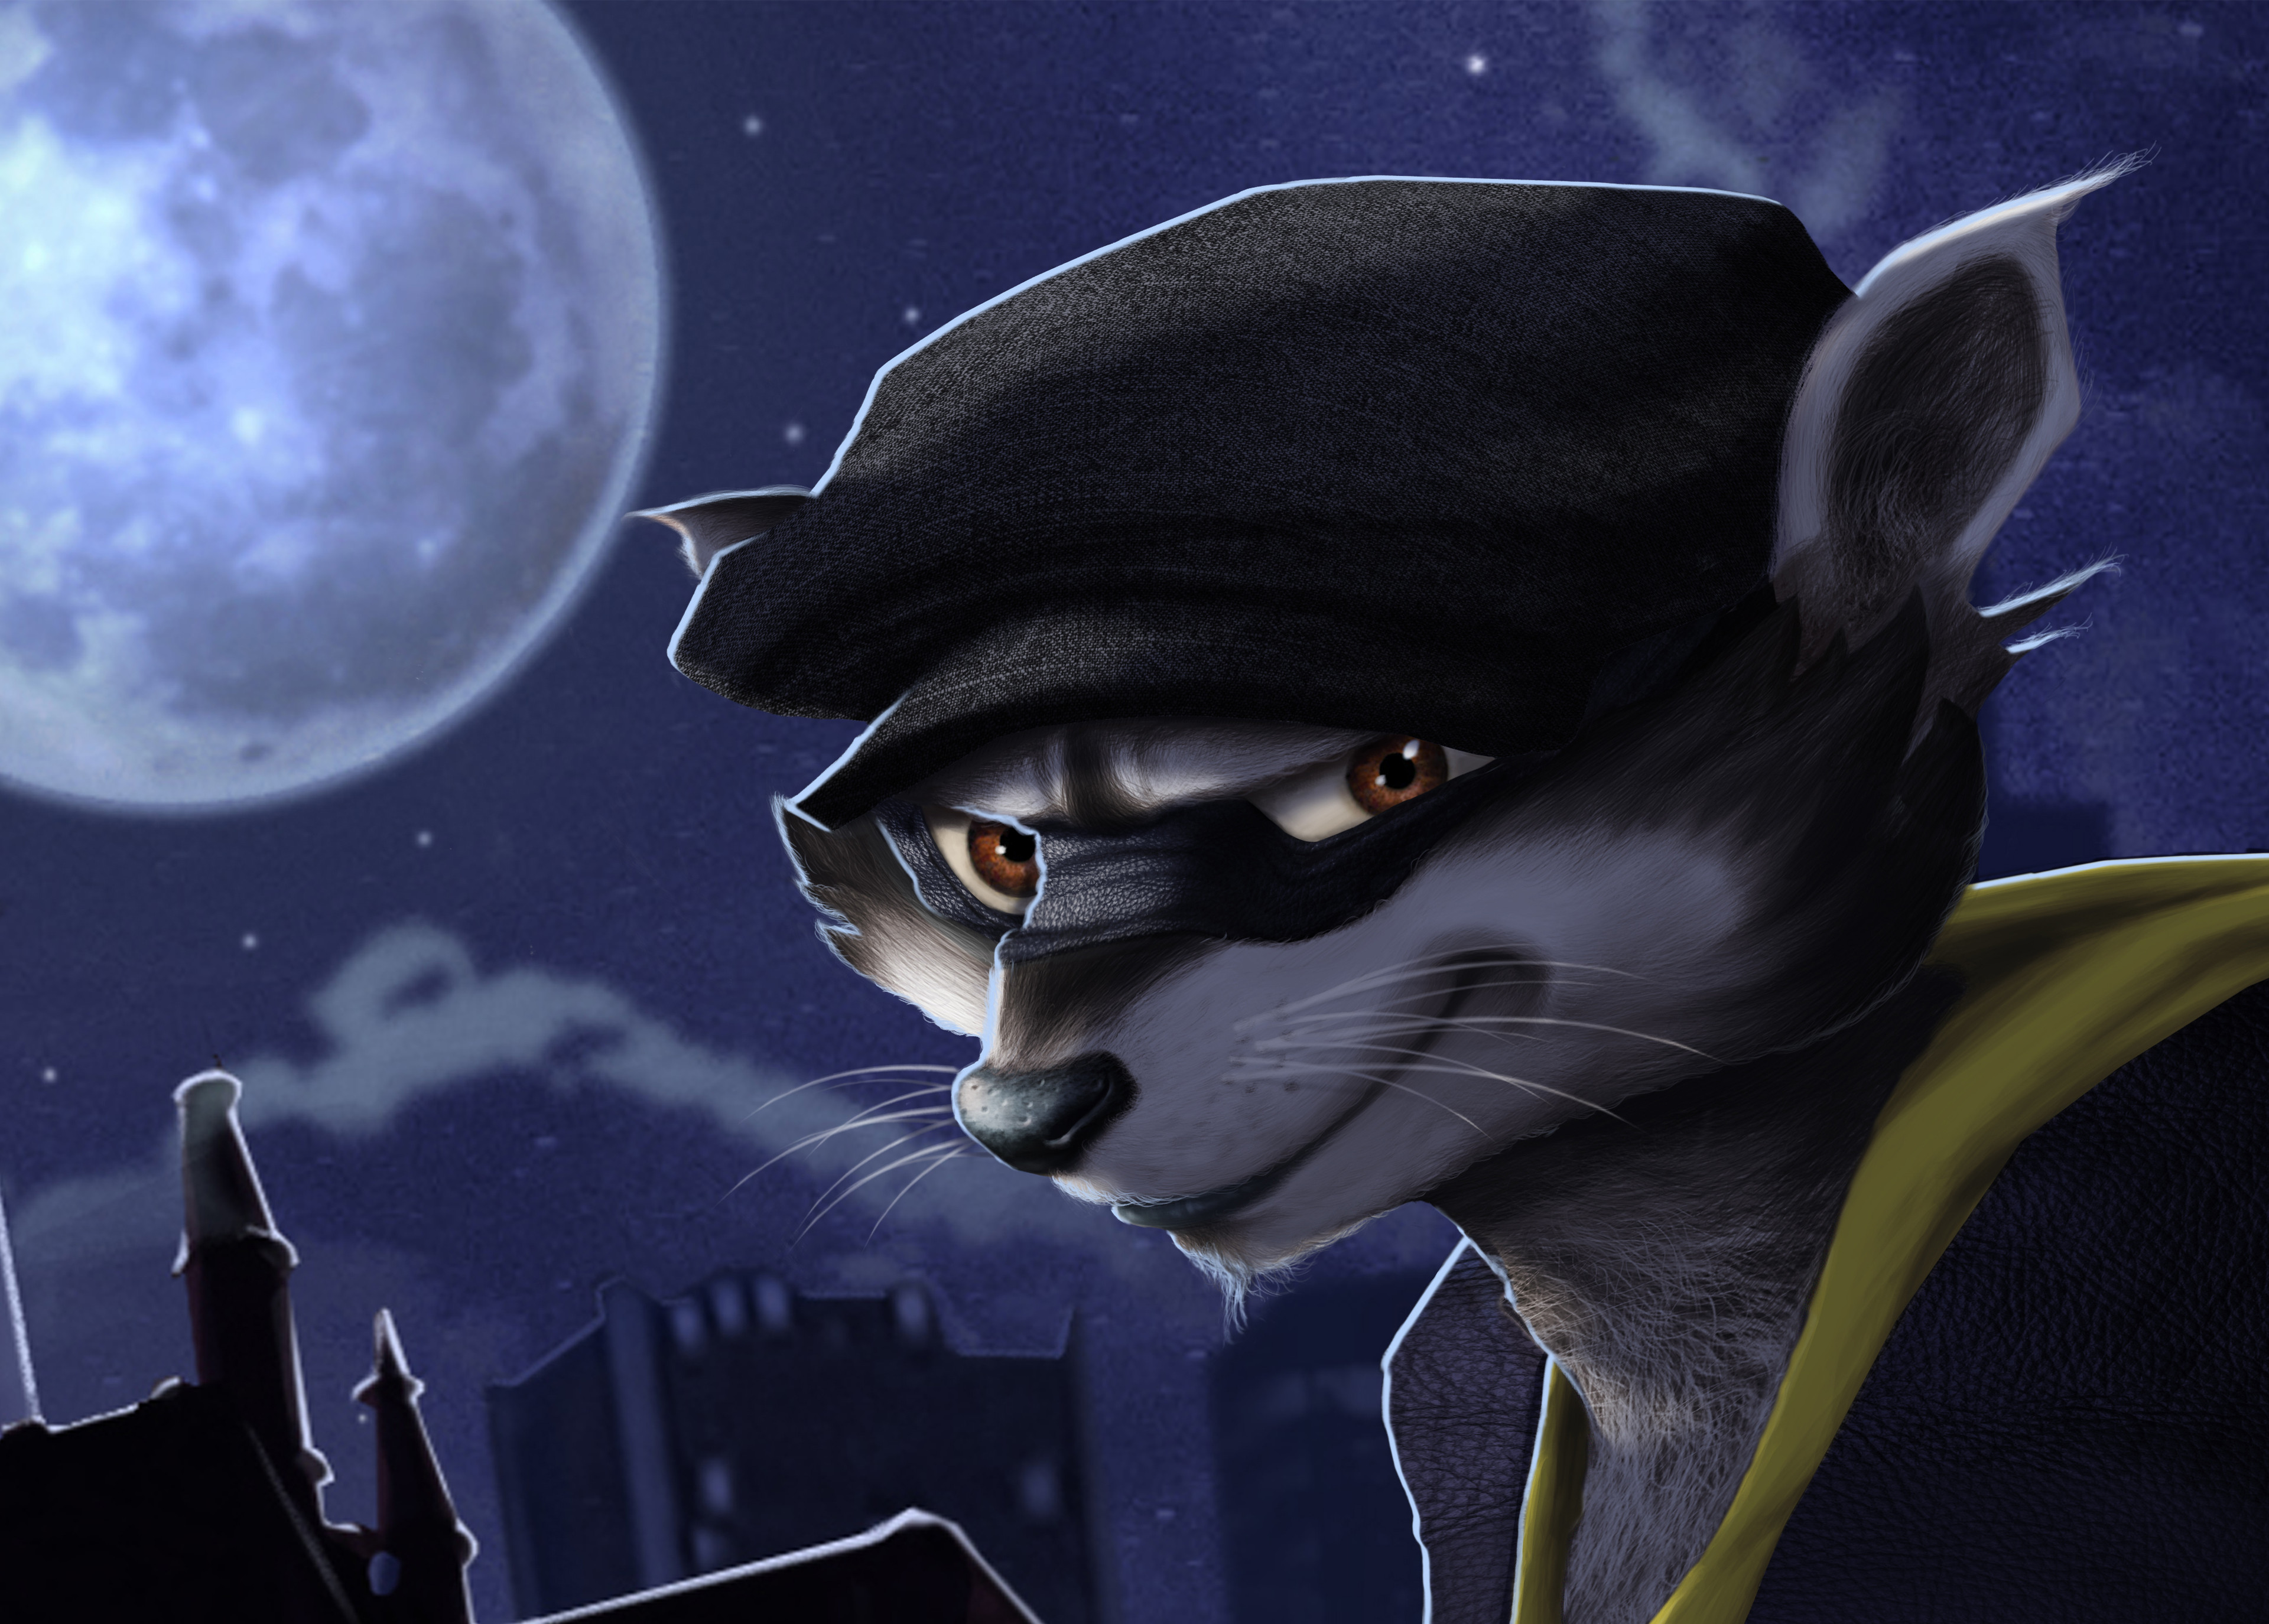 Sly Cooper movie coming in 2016, here's the first trailer - GameSpot